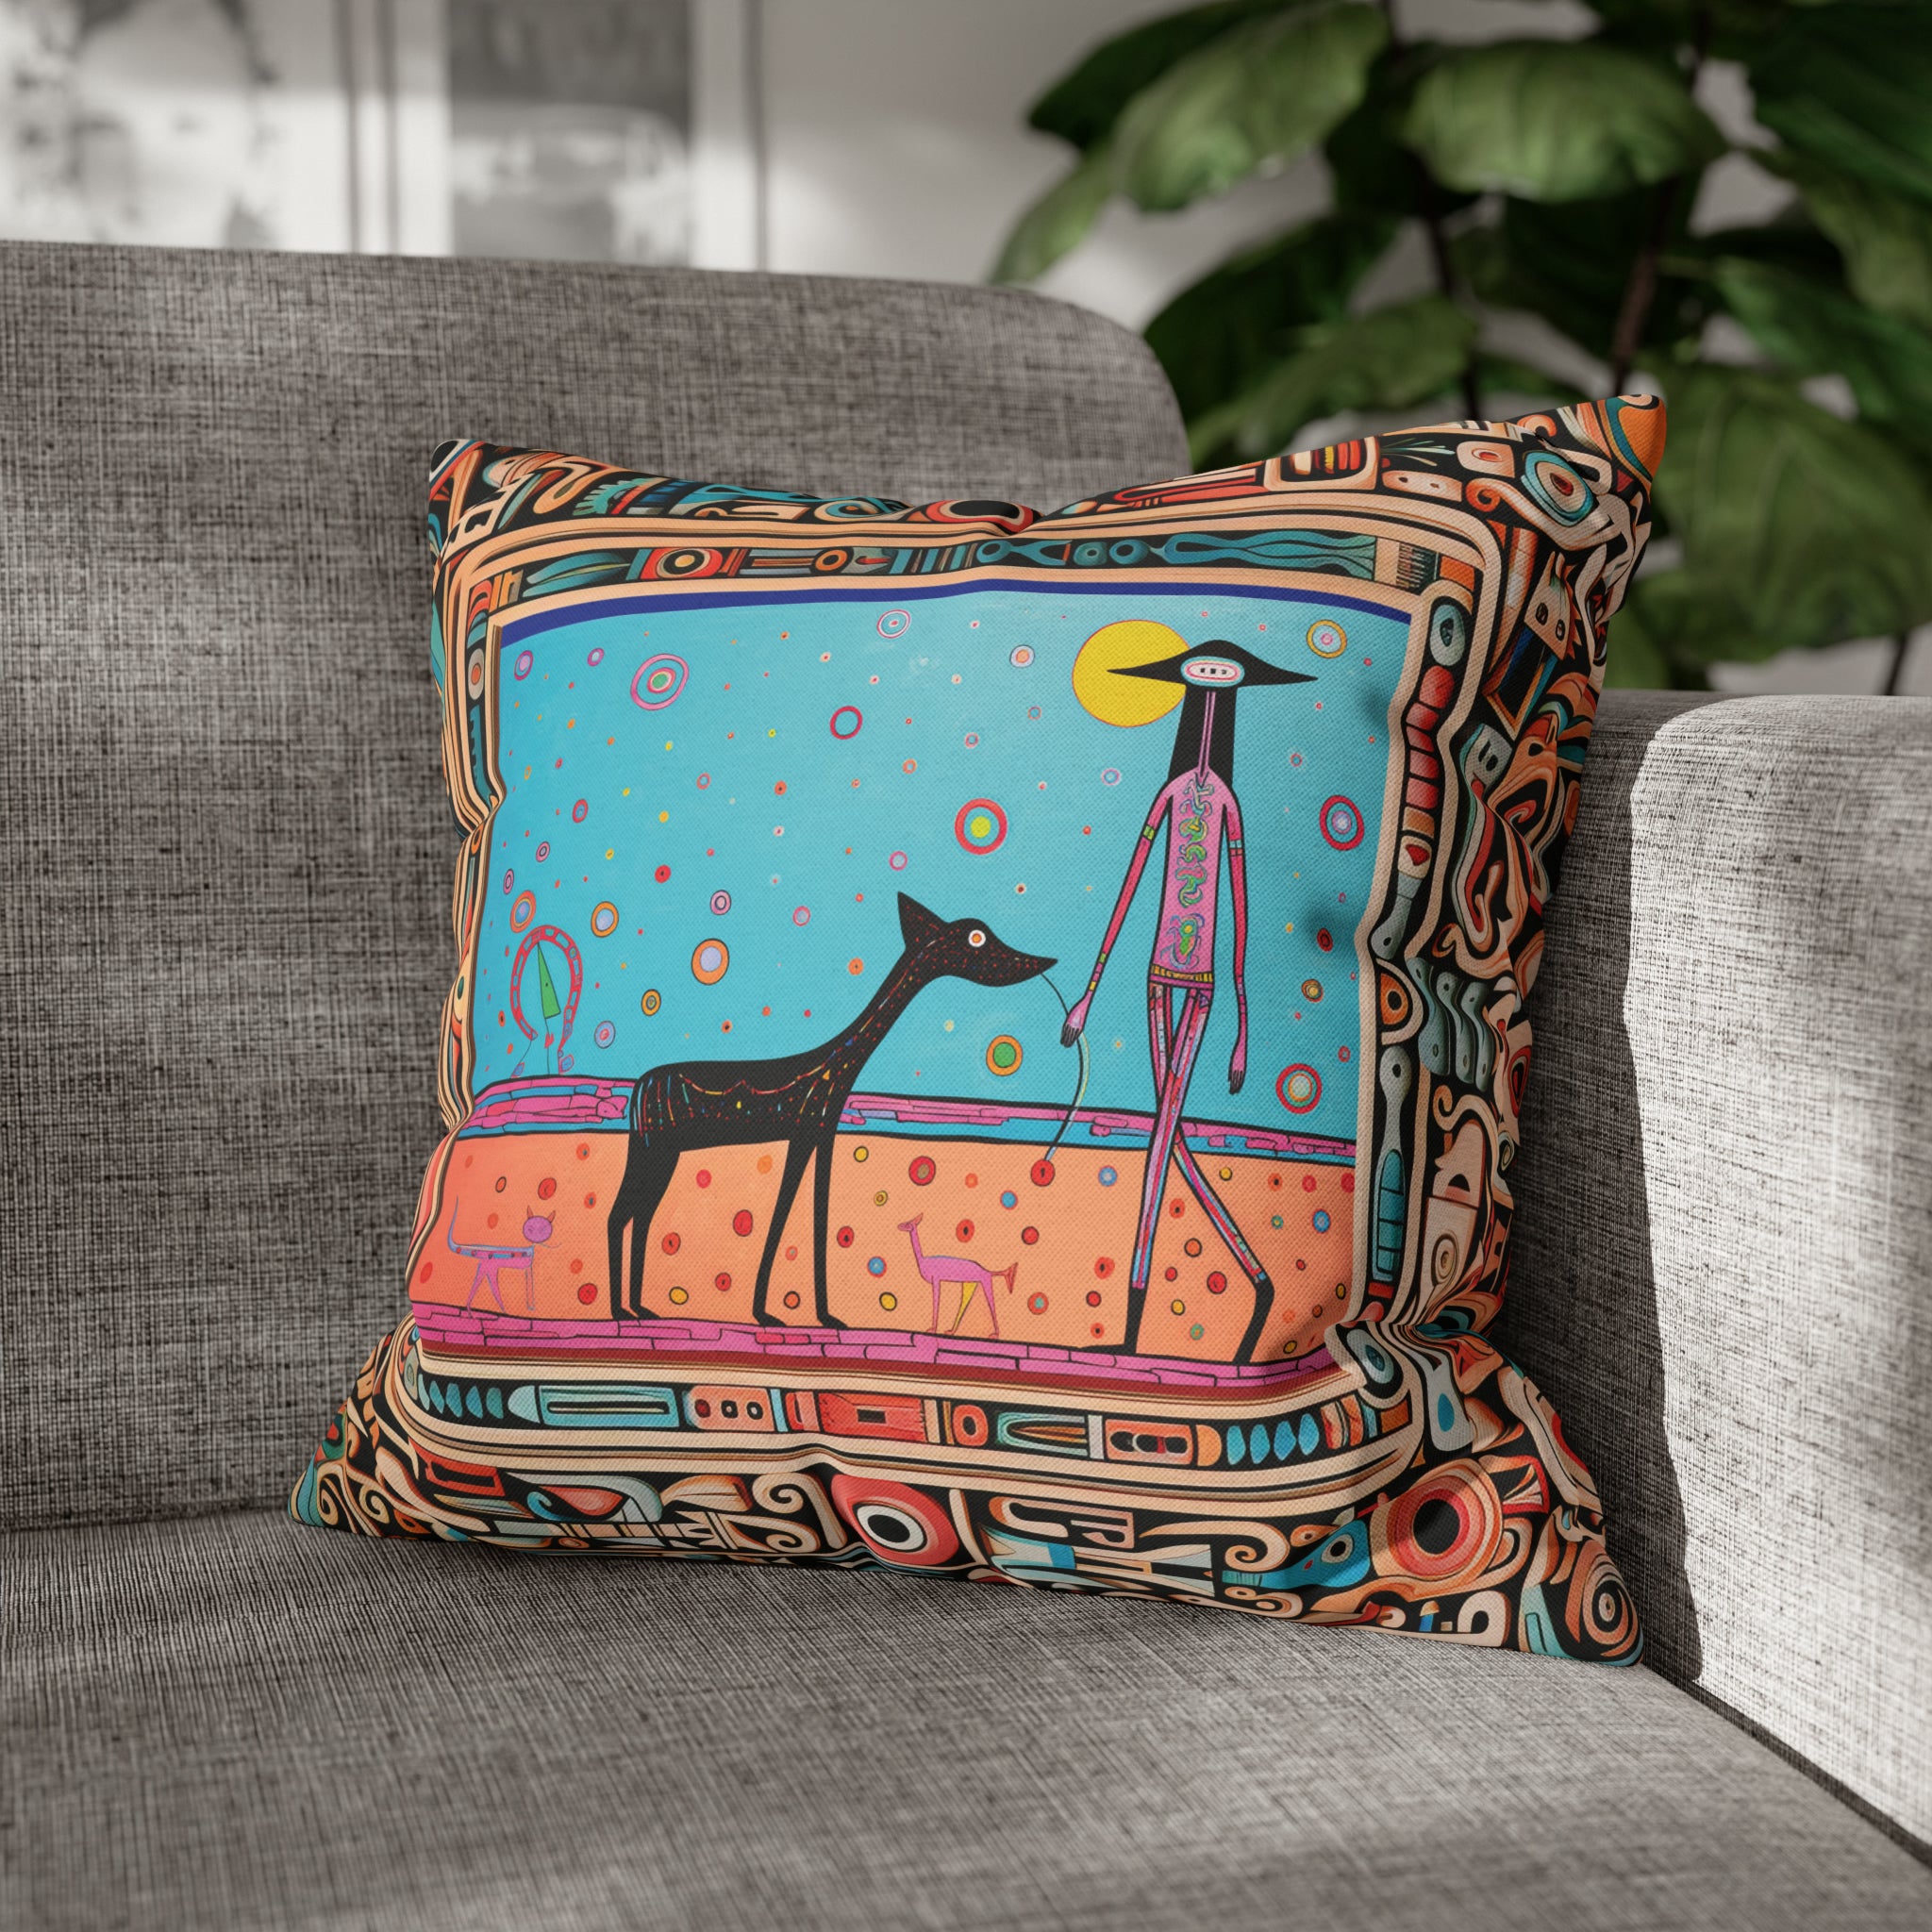 Square Pillow Case 18" x 18", CASE ONLY, no pillow form, original Pop Art Style, Alien Walking Her Dog, Image in a Frame